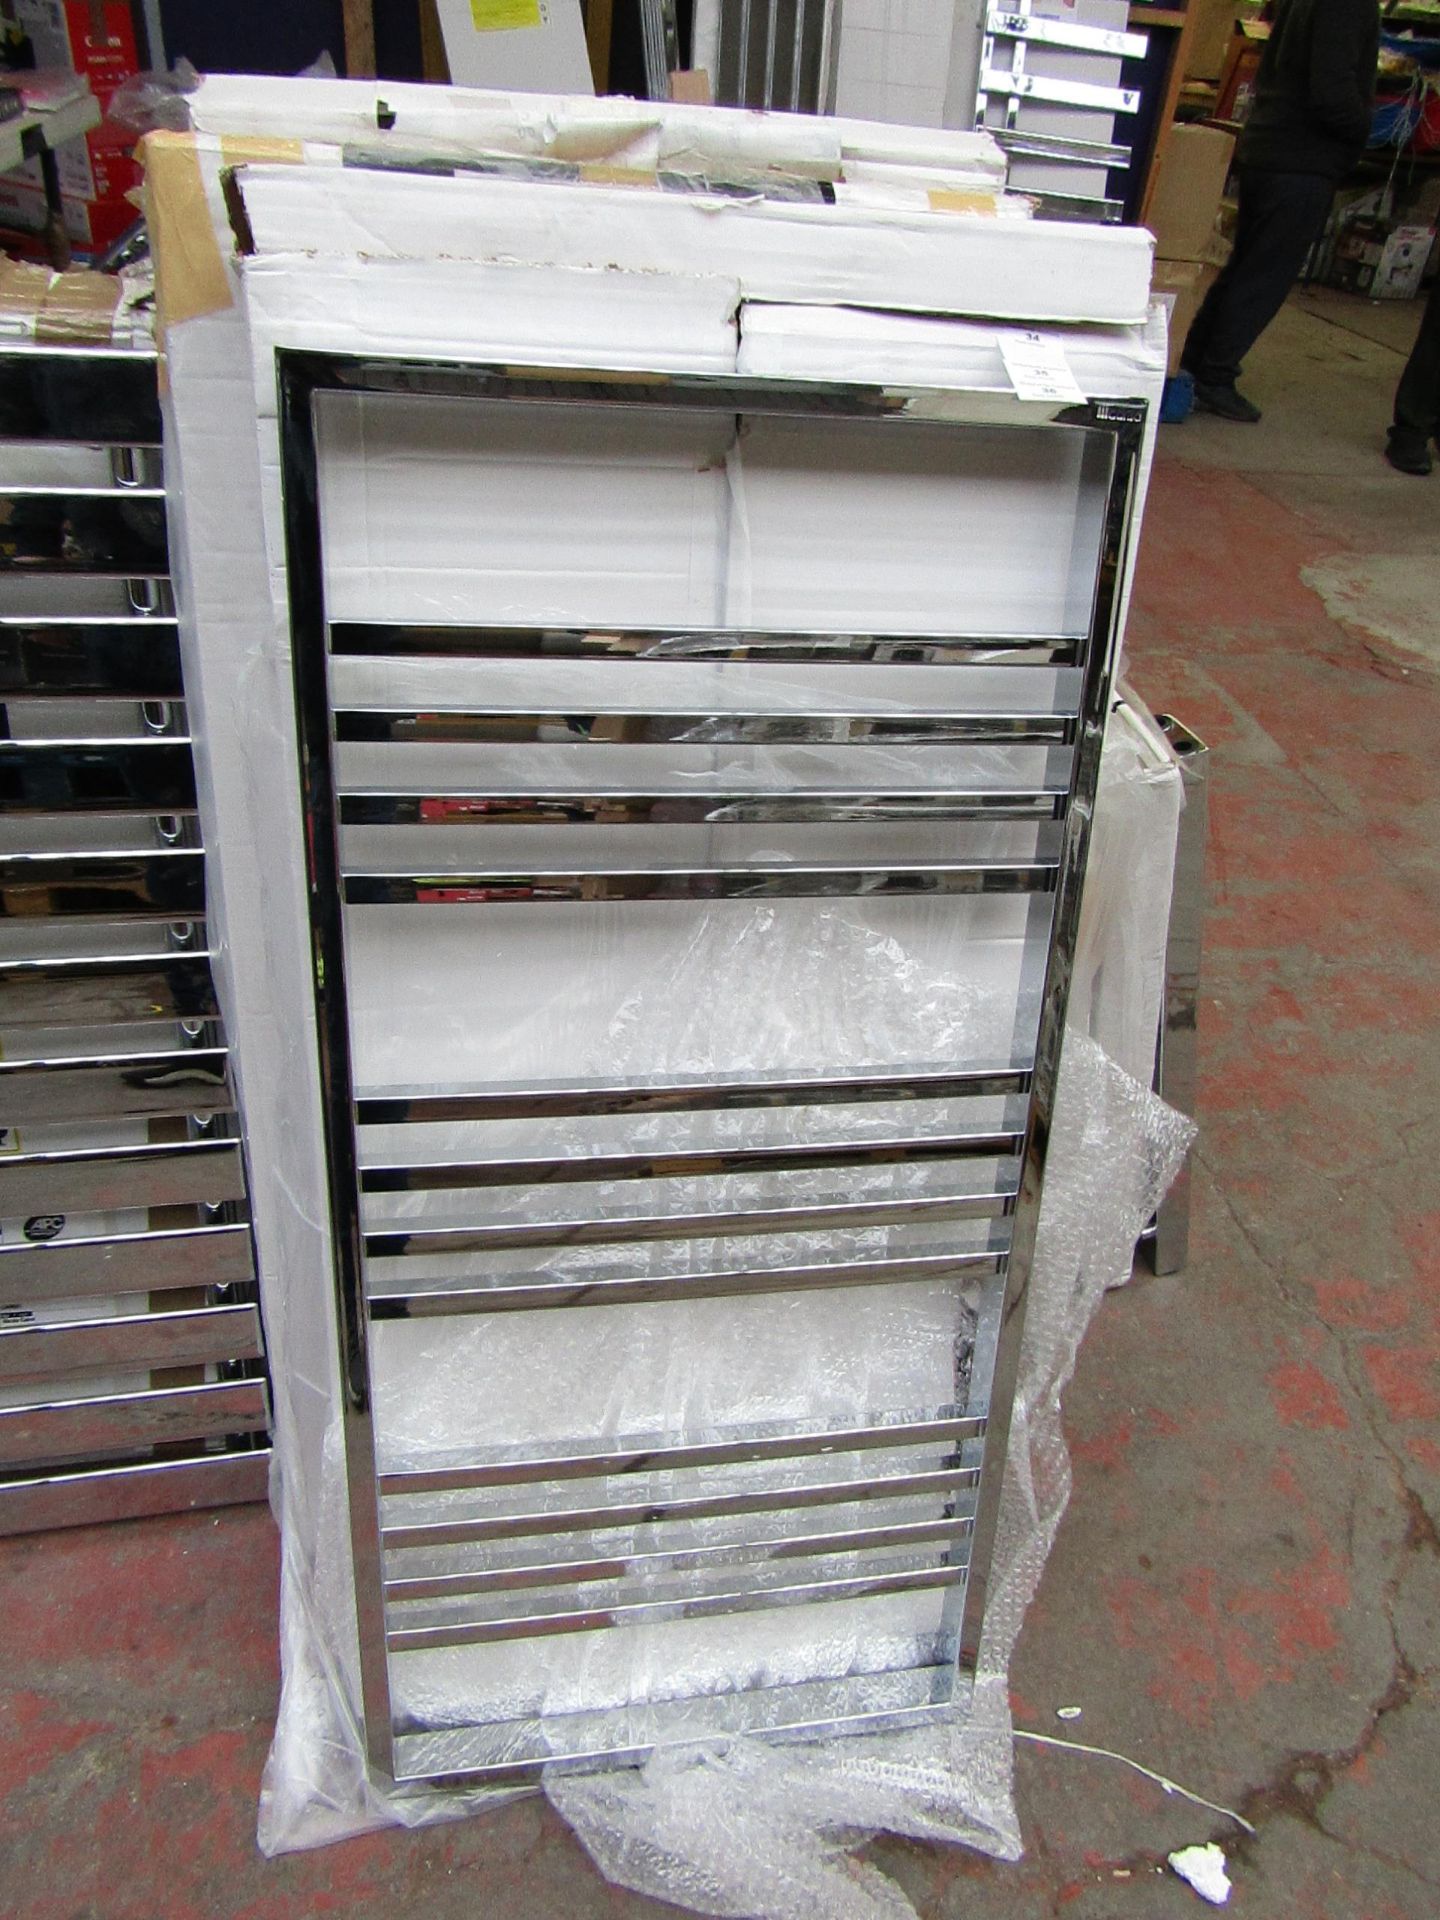 Carisa Frame Chrome 500x1050 radiator, with box, RRP £401, please read lot 0.